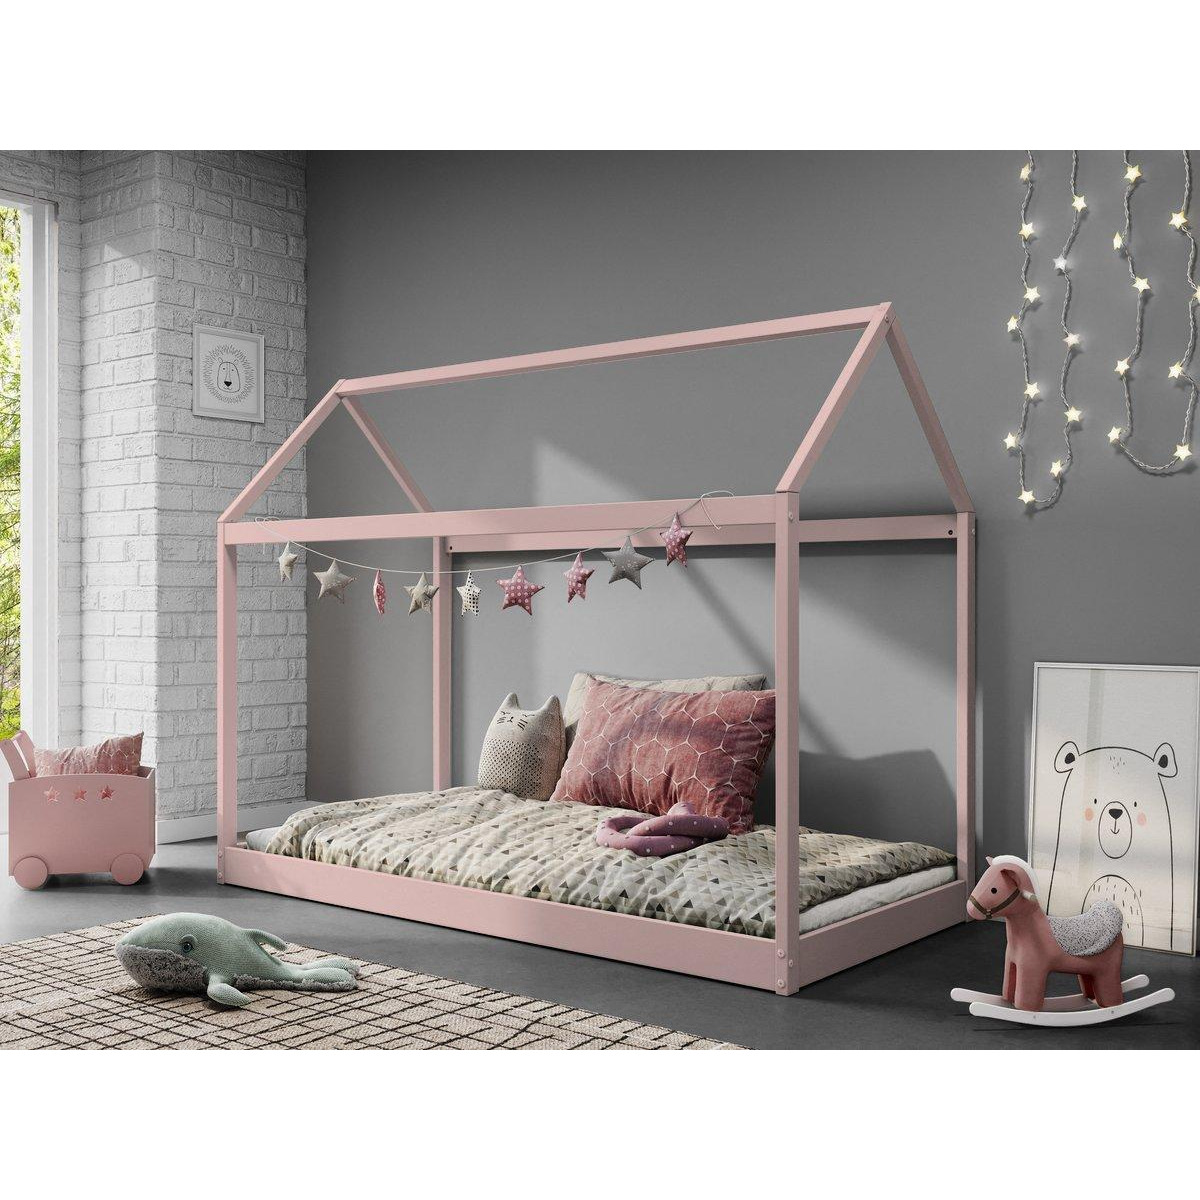 Taylor Wooden Kids Montessori House Bed - image 1